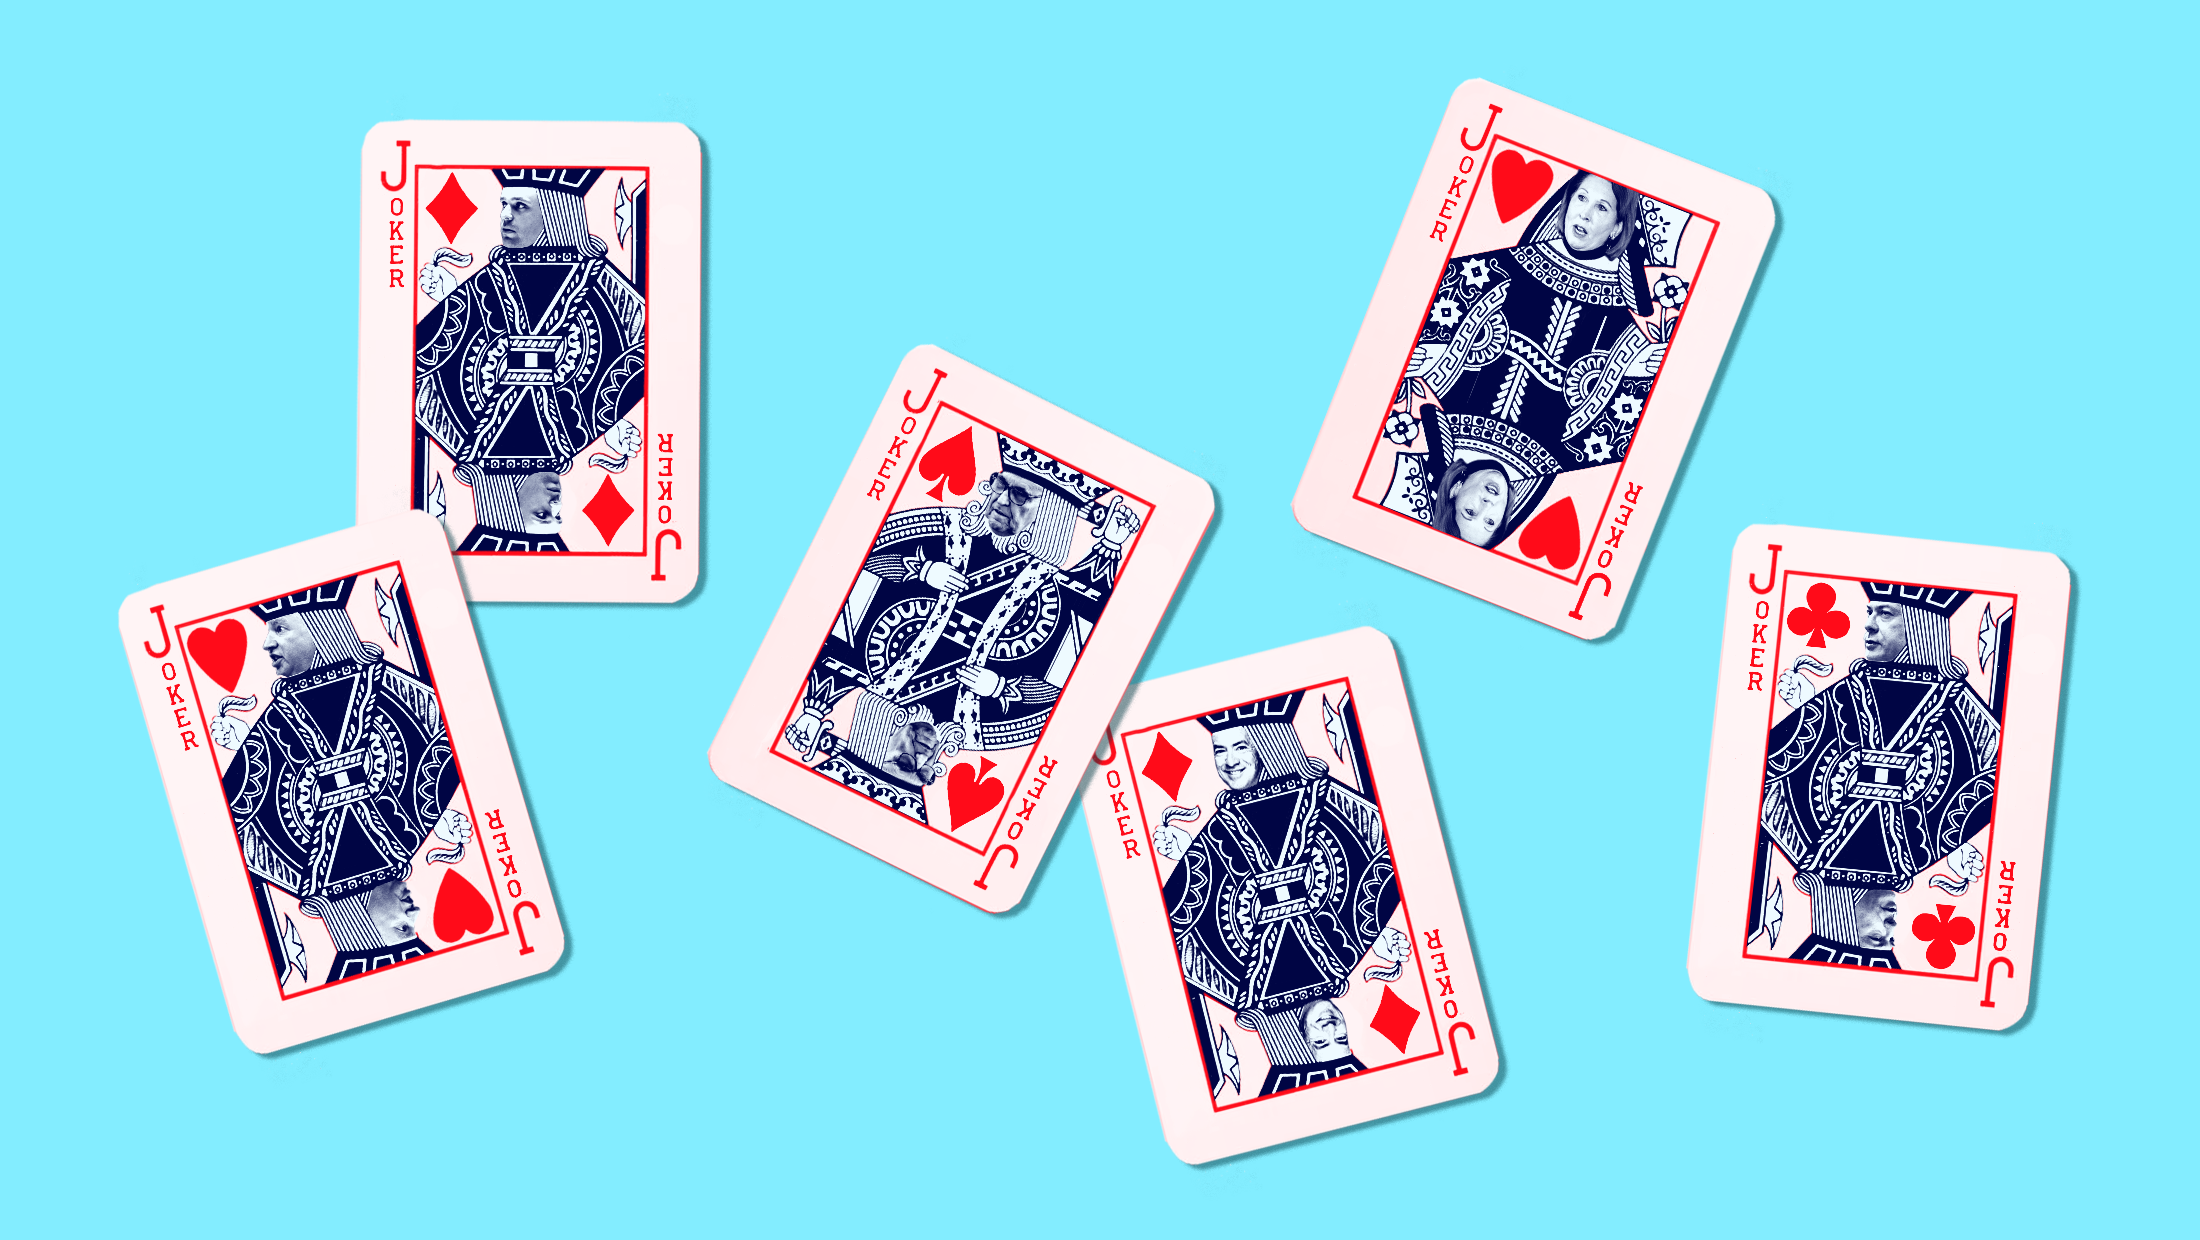 On top of a bright blue backrgound are six red-toned joker cards with the faces of the six likely co-conspirators in Trump's Washington, D.C. indictment.